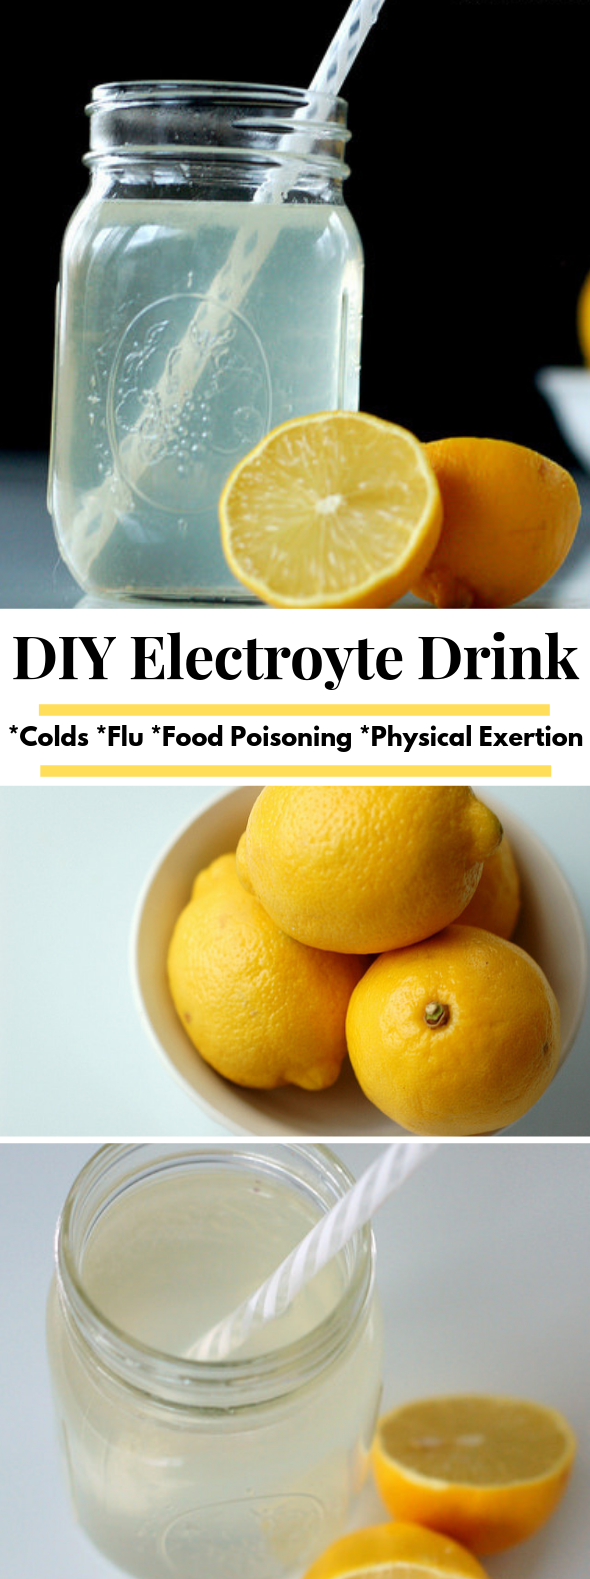 DIY Electrolyte Drink :: Natural rehydration for colds, flu, food poisoning, & physical exertion #drink #healthydrink